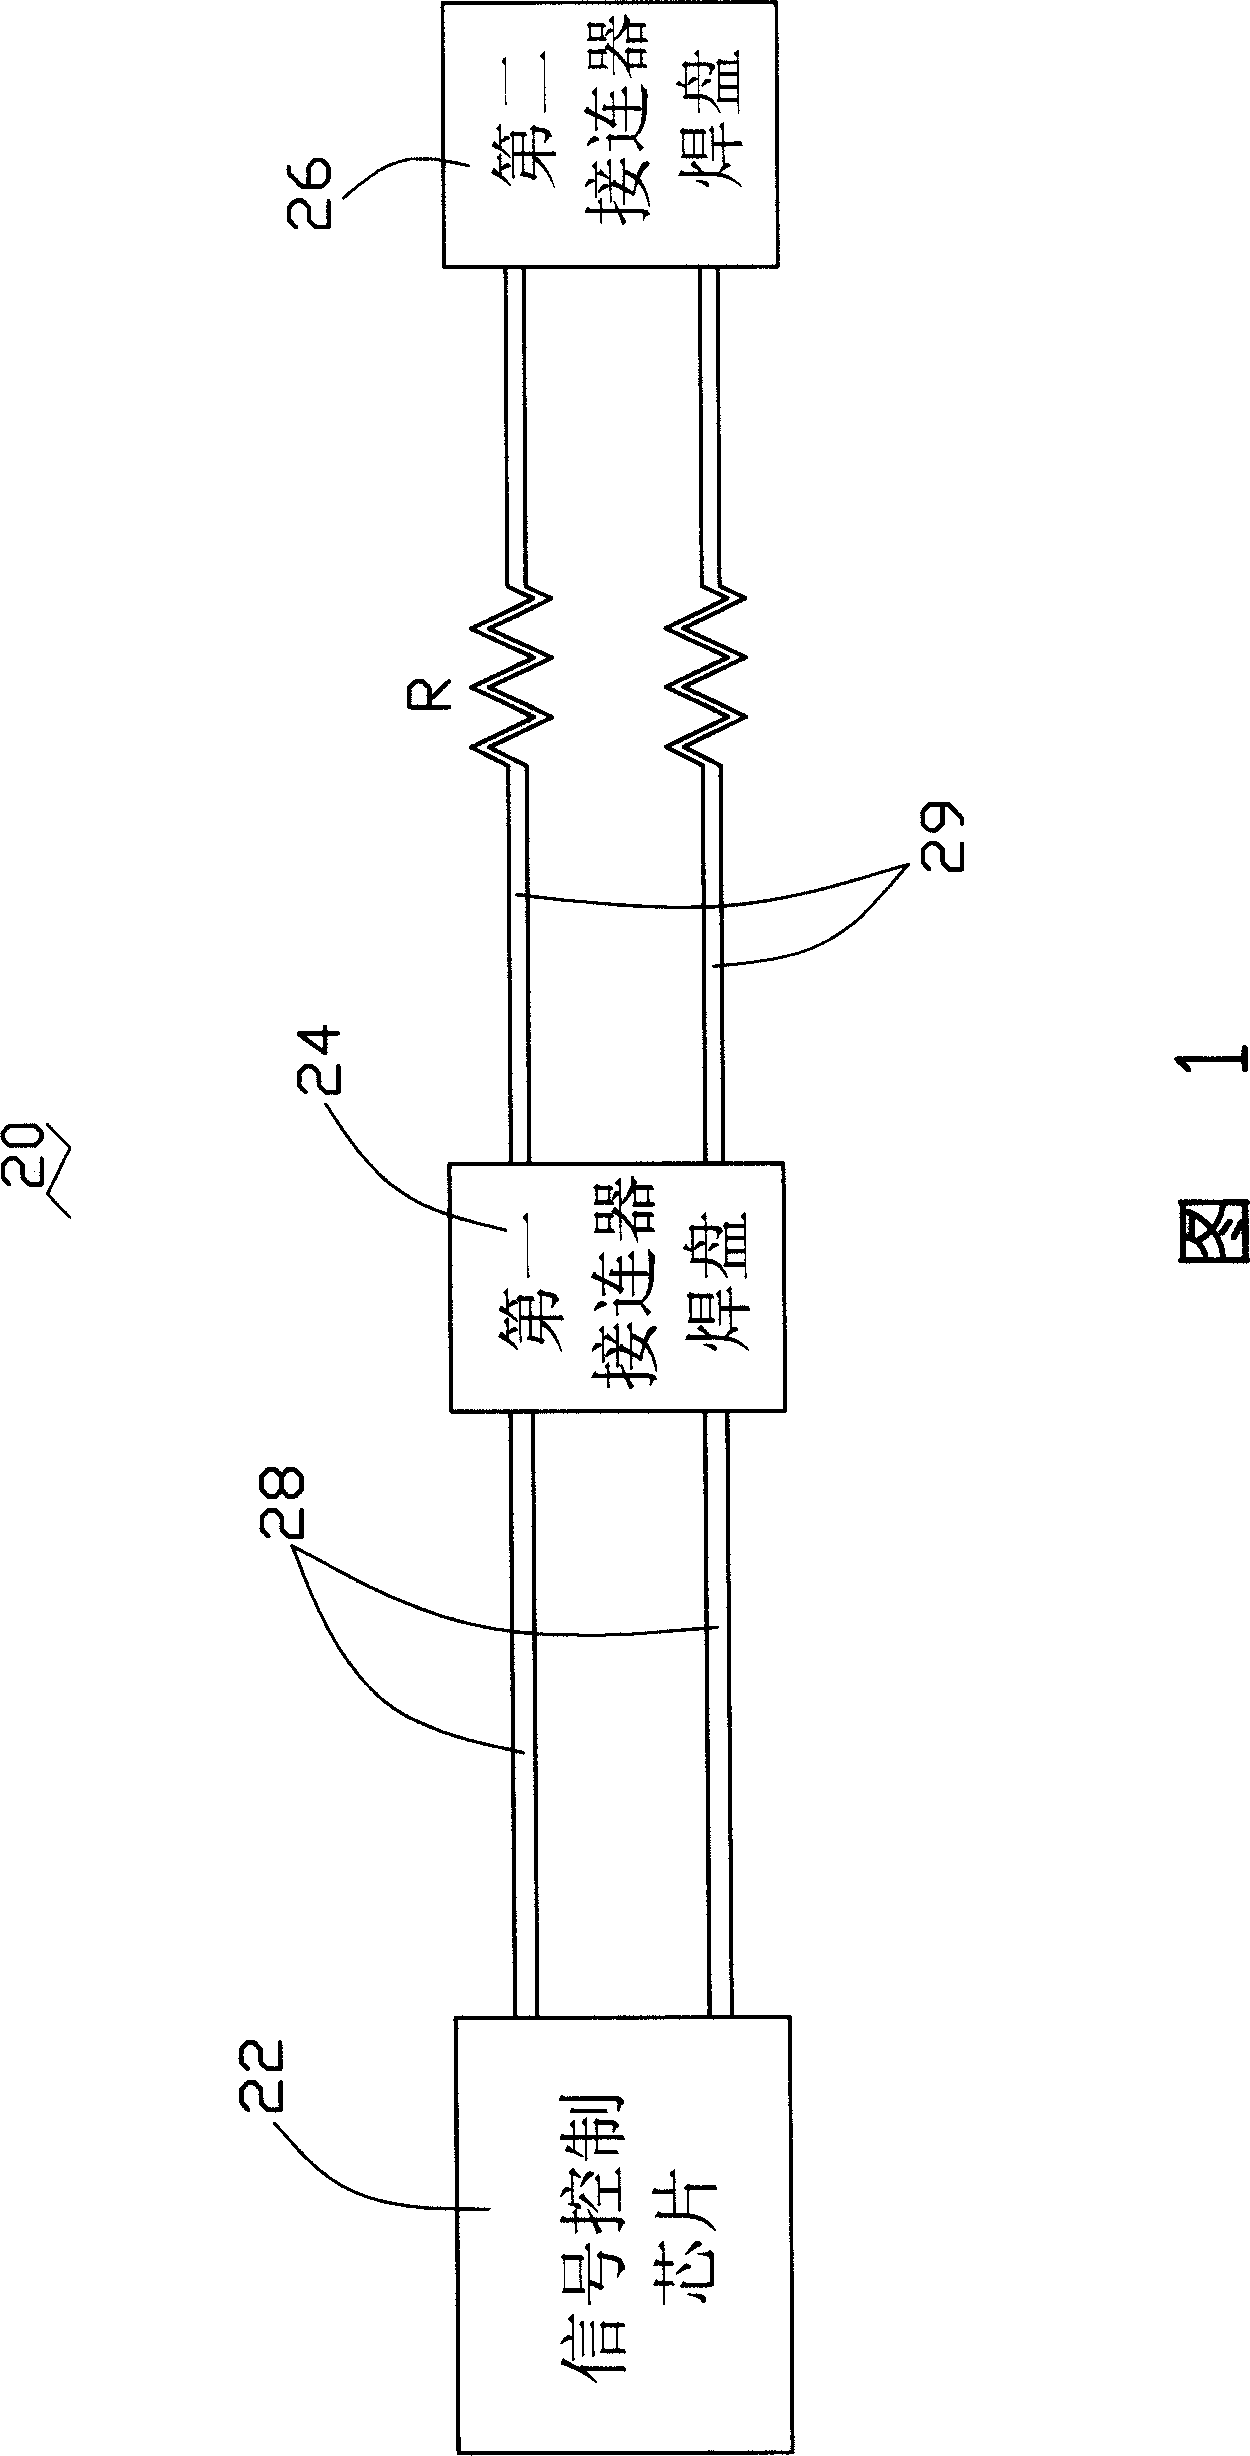 High speed differential signal transmission structure